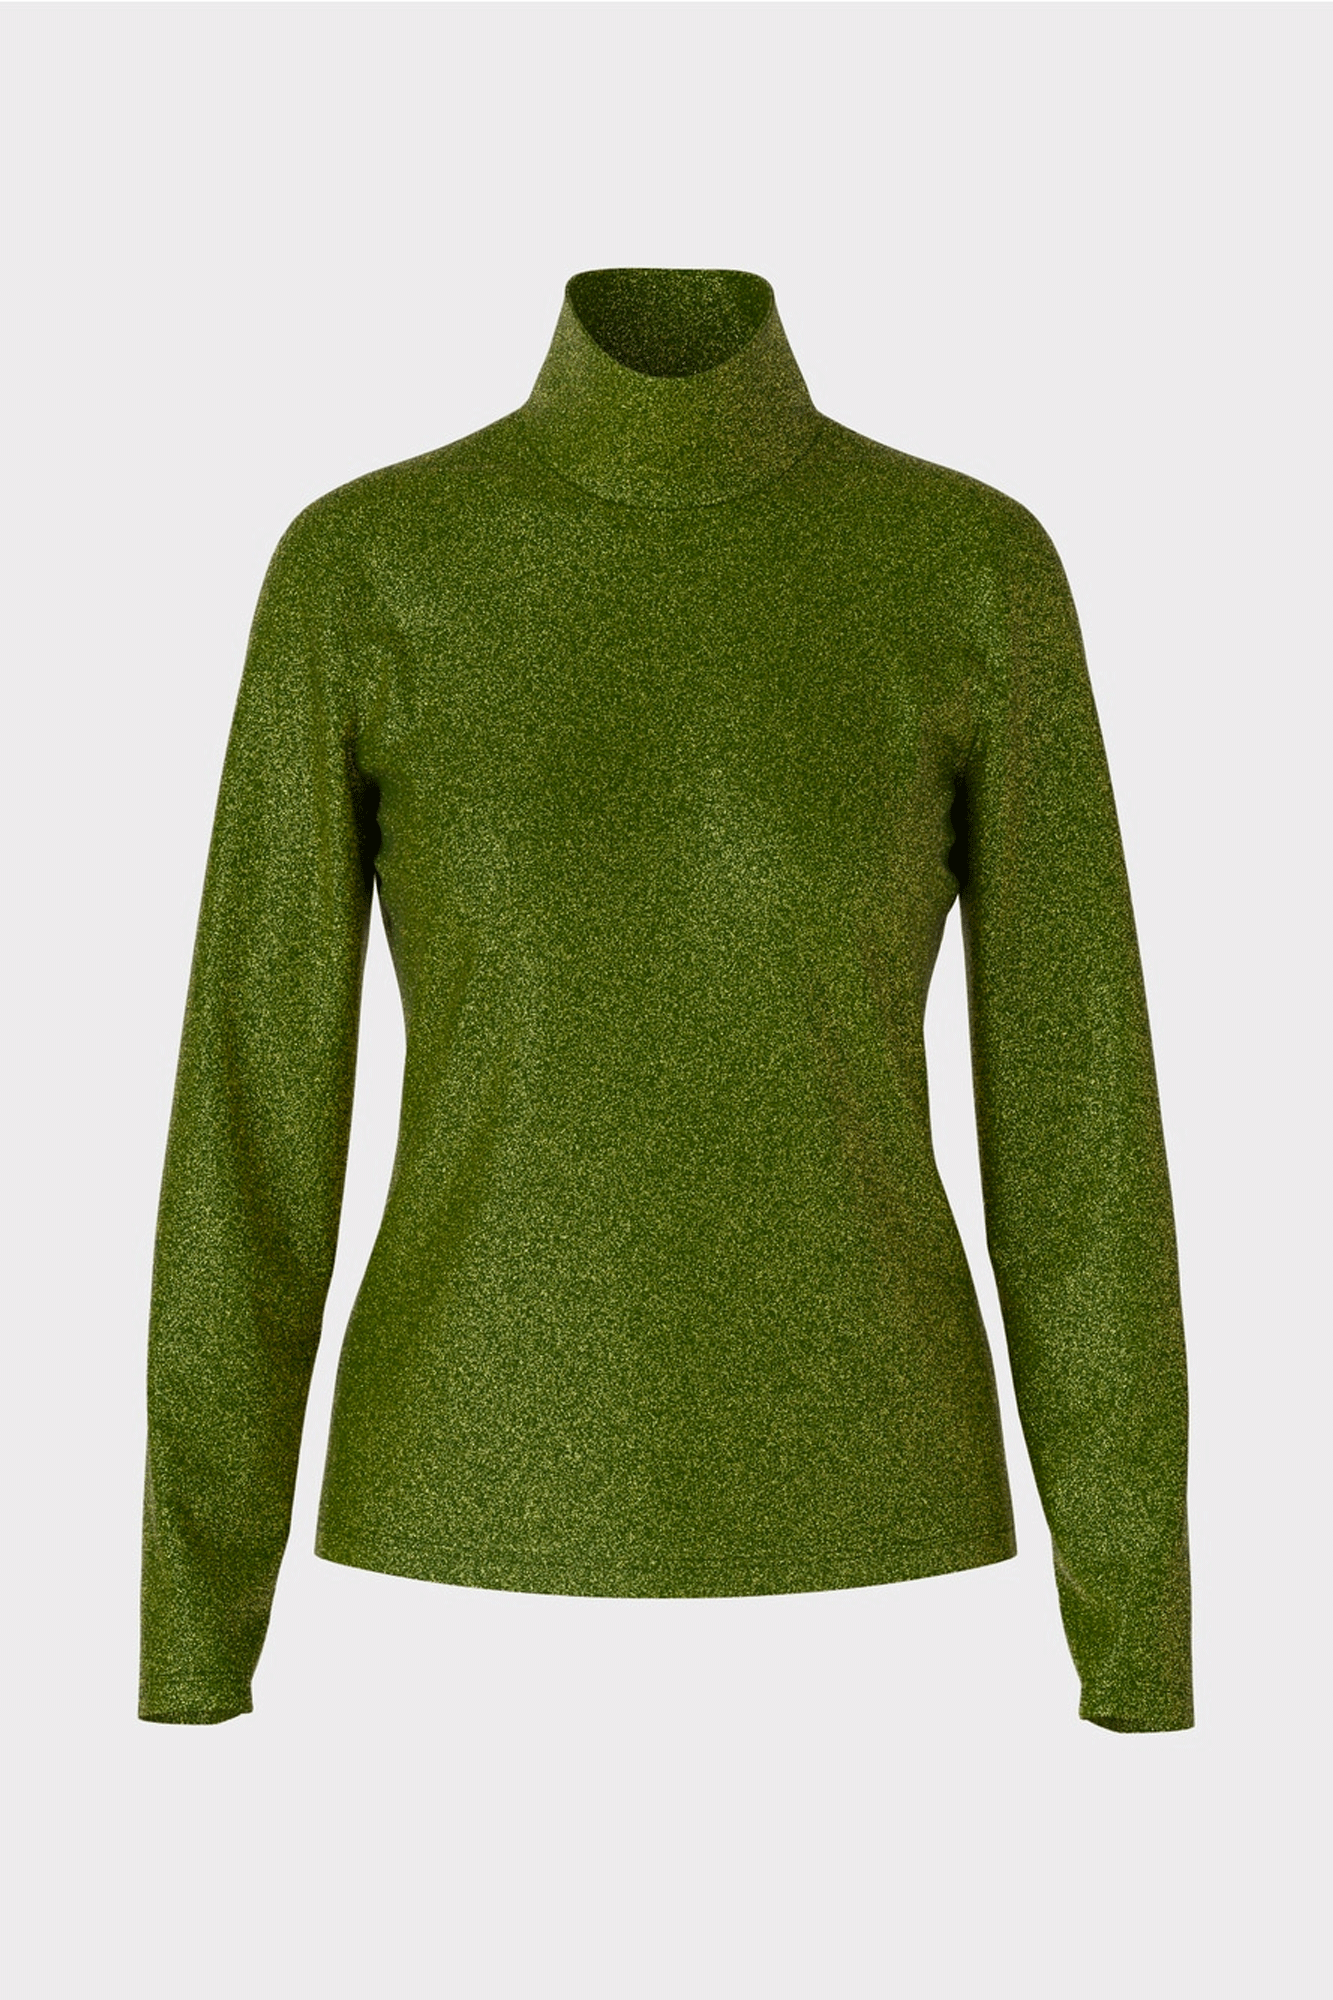 This Turtleneck T-Shirt from Marc Cain is the perfect addition to any festive look. It features a glittery, fine and flexible jersey, a narrow shape, turtleneck, and long sleeves. Crafted with sophisticated elegance, this shirt is sure to make a statement.